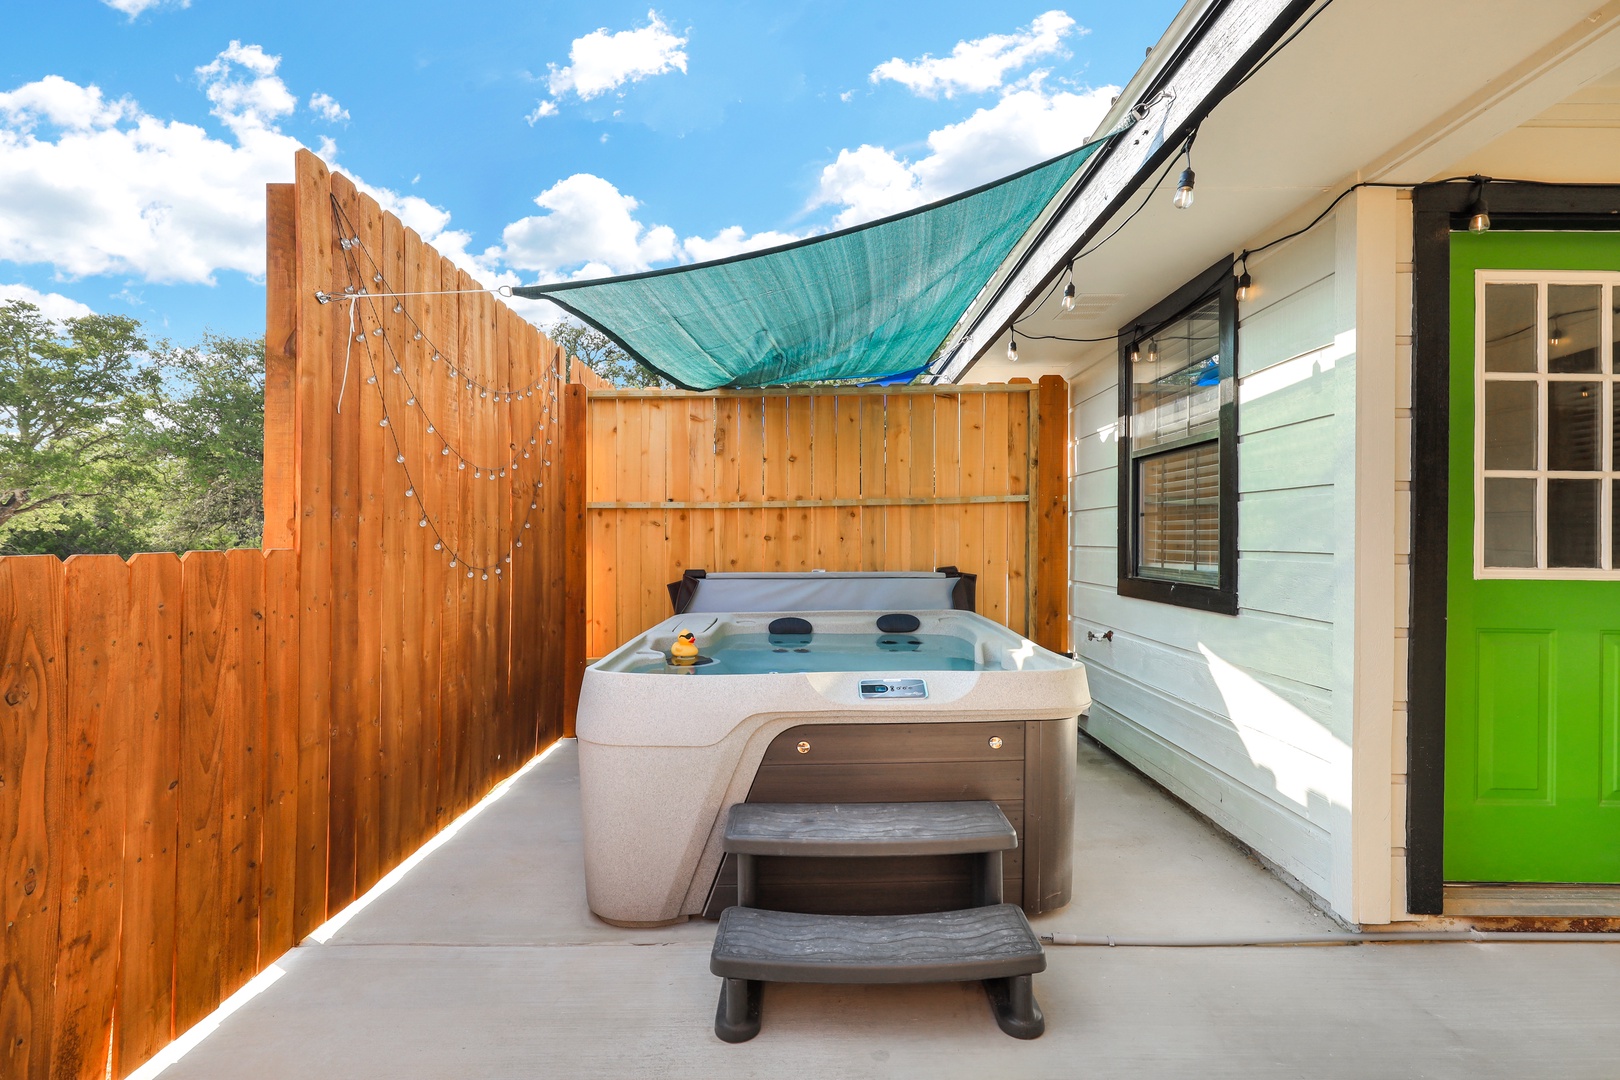 Kick back & relax on the patio or soak in the private hot tub